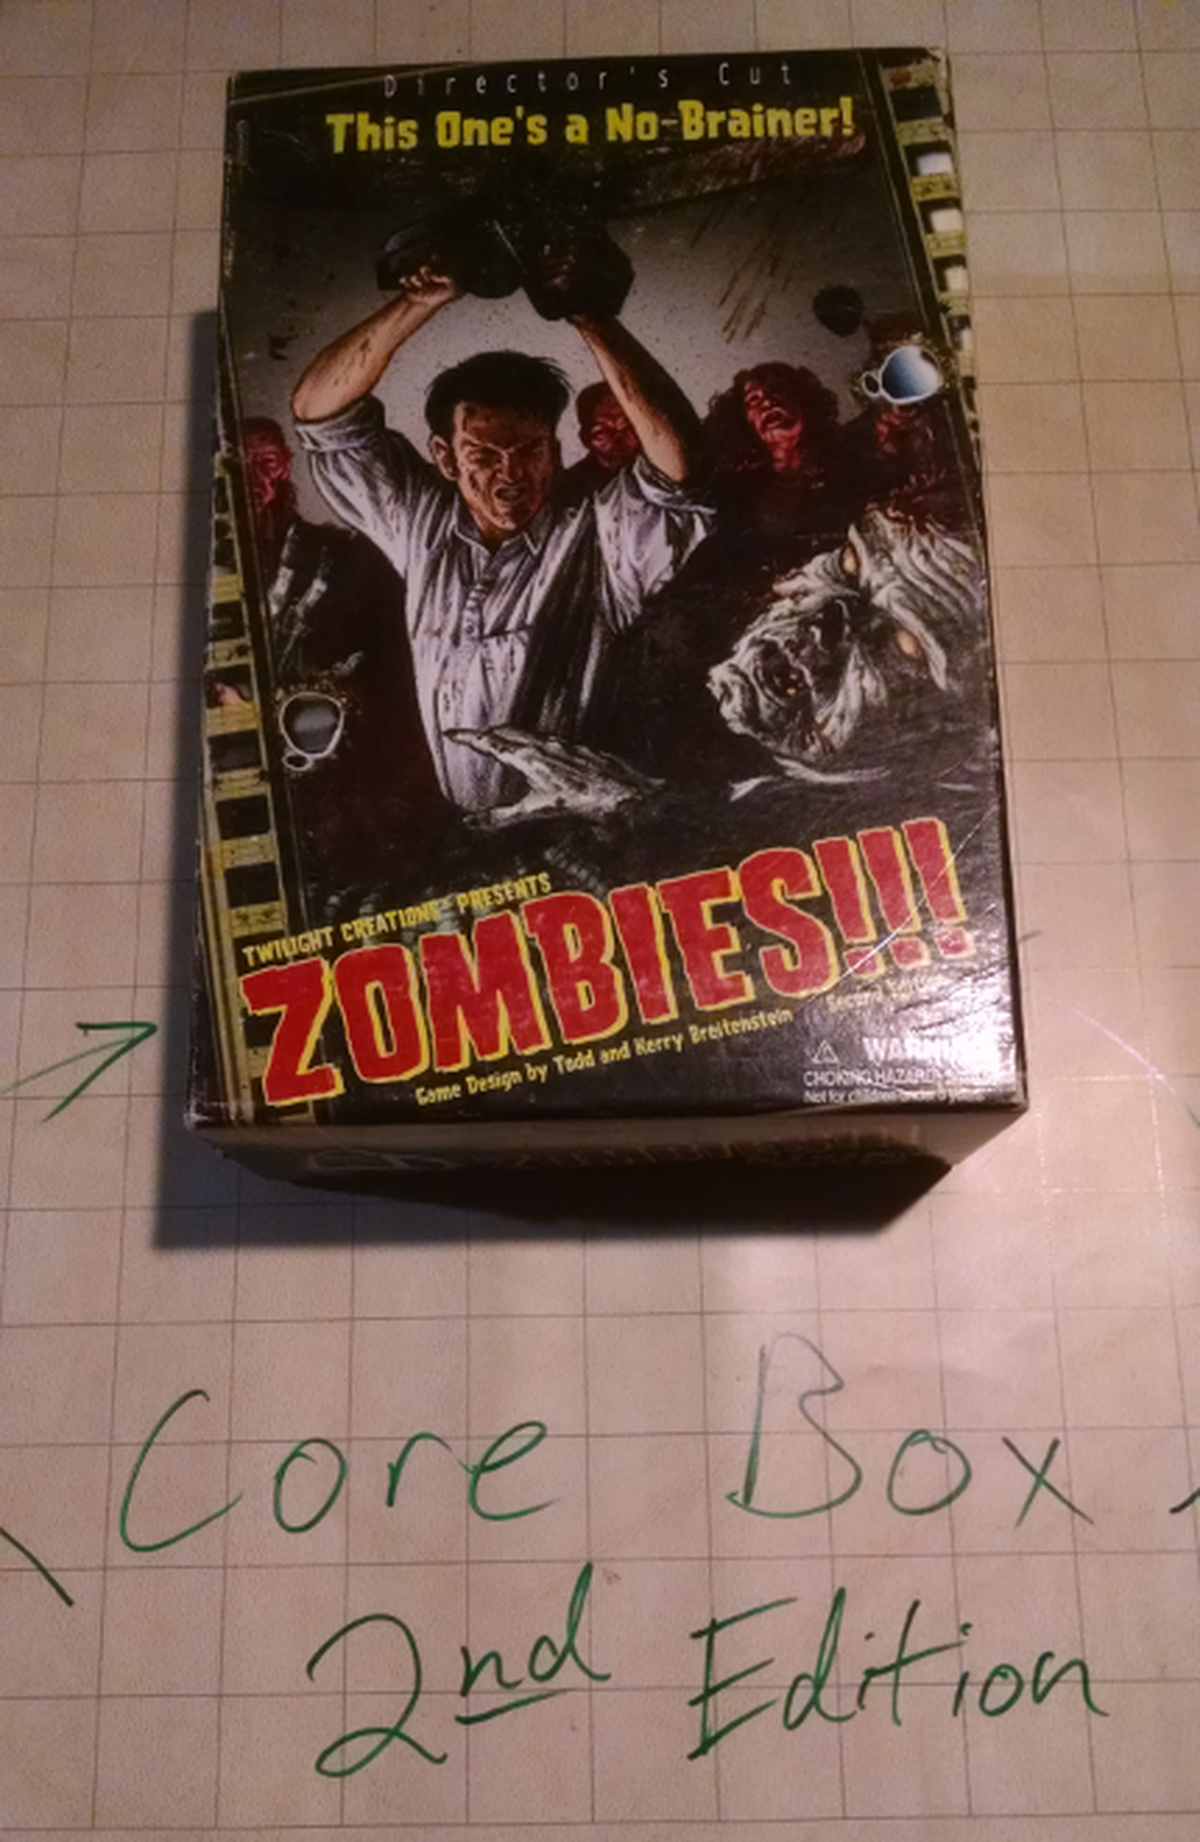 Core Box 2nd Edition (Andrew Smith)